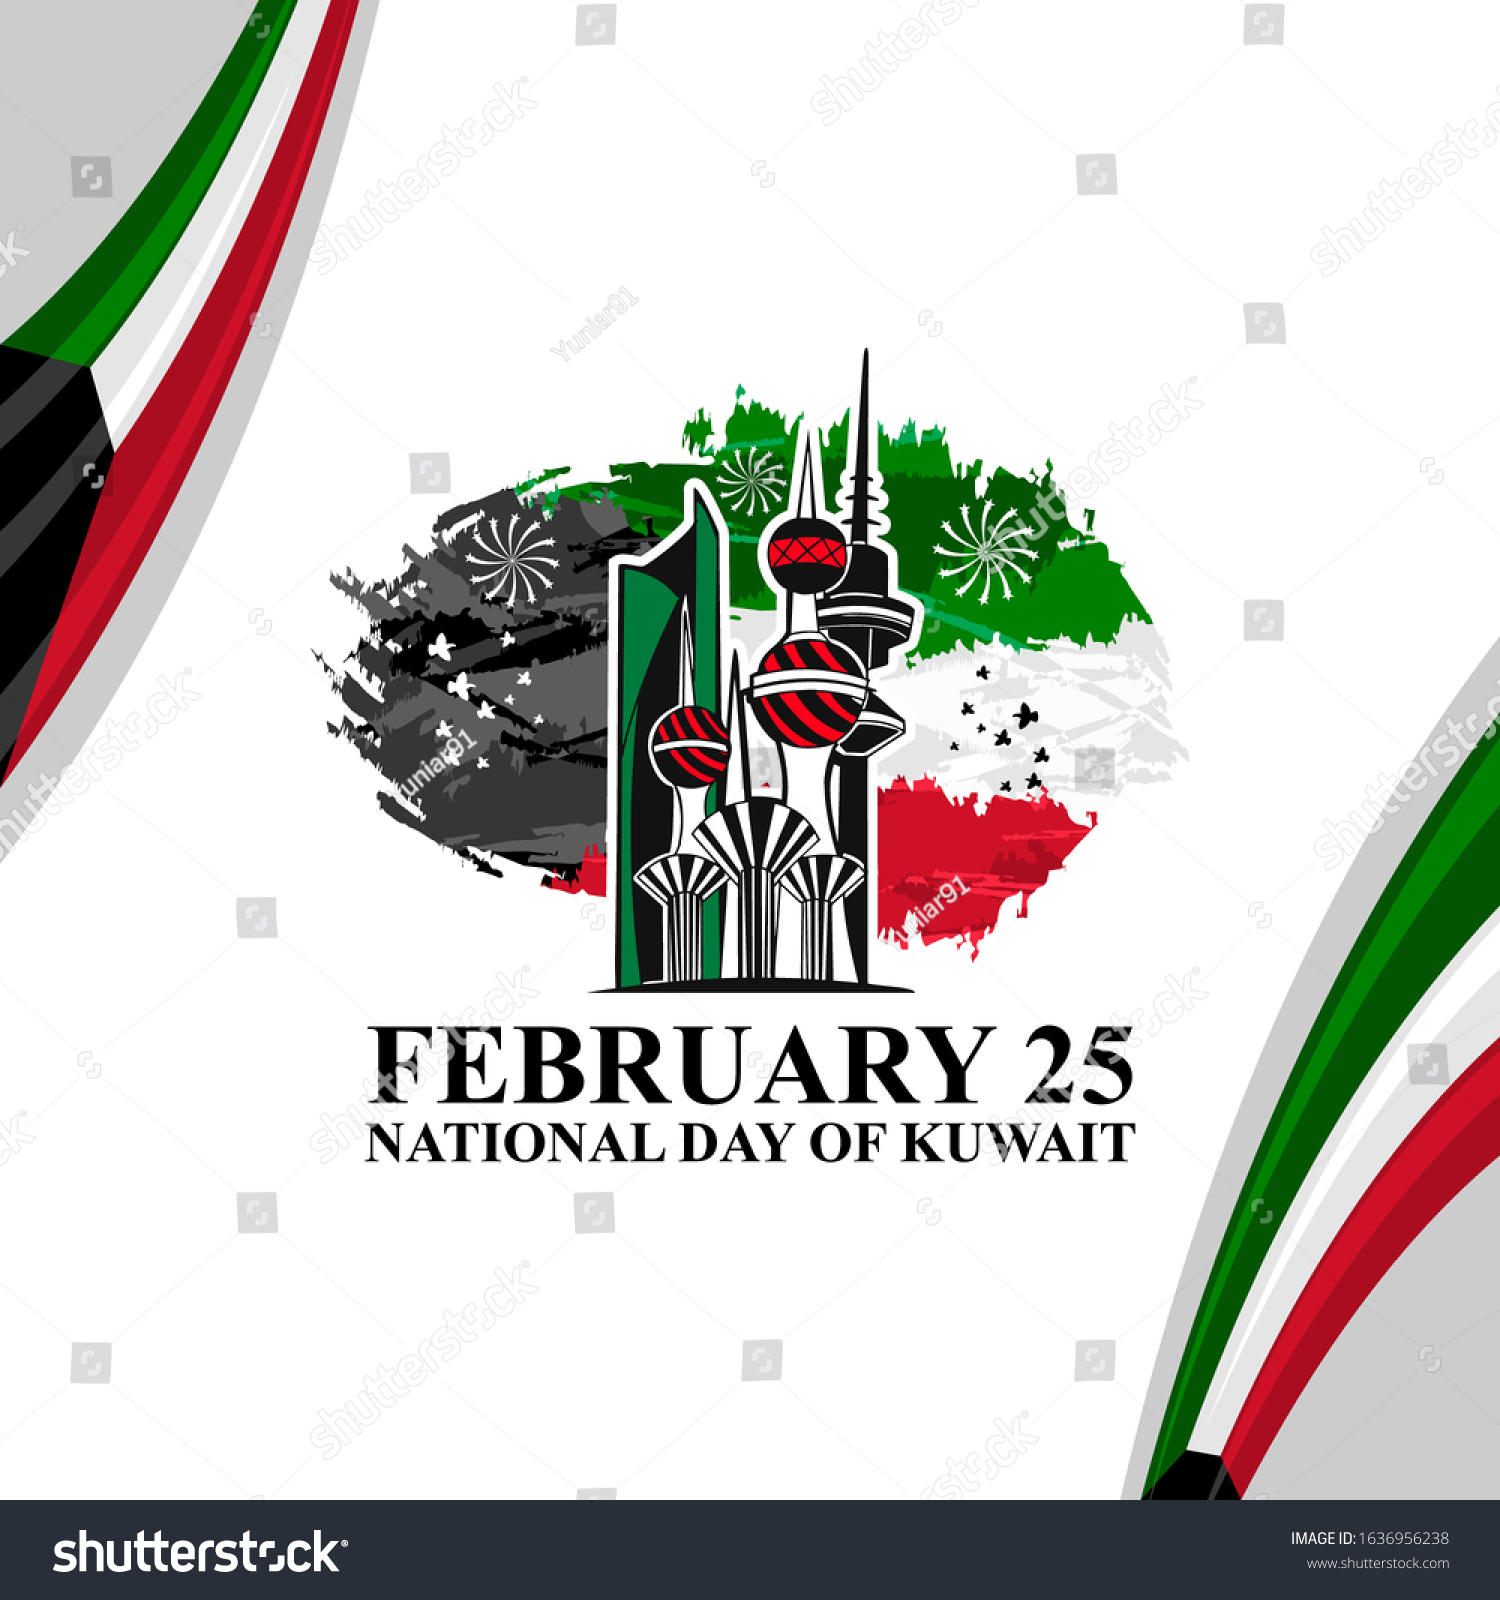 February 25 National Day Kuwait Vector Stock Vector (Royalty Free ...